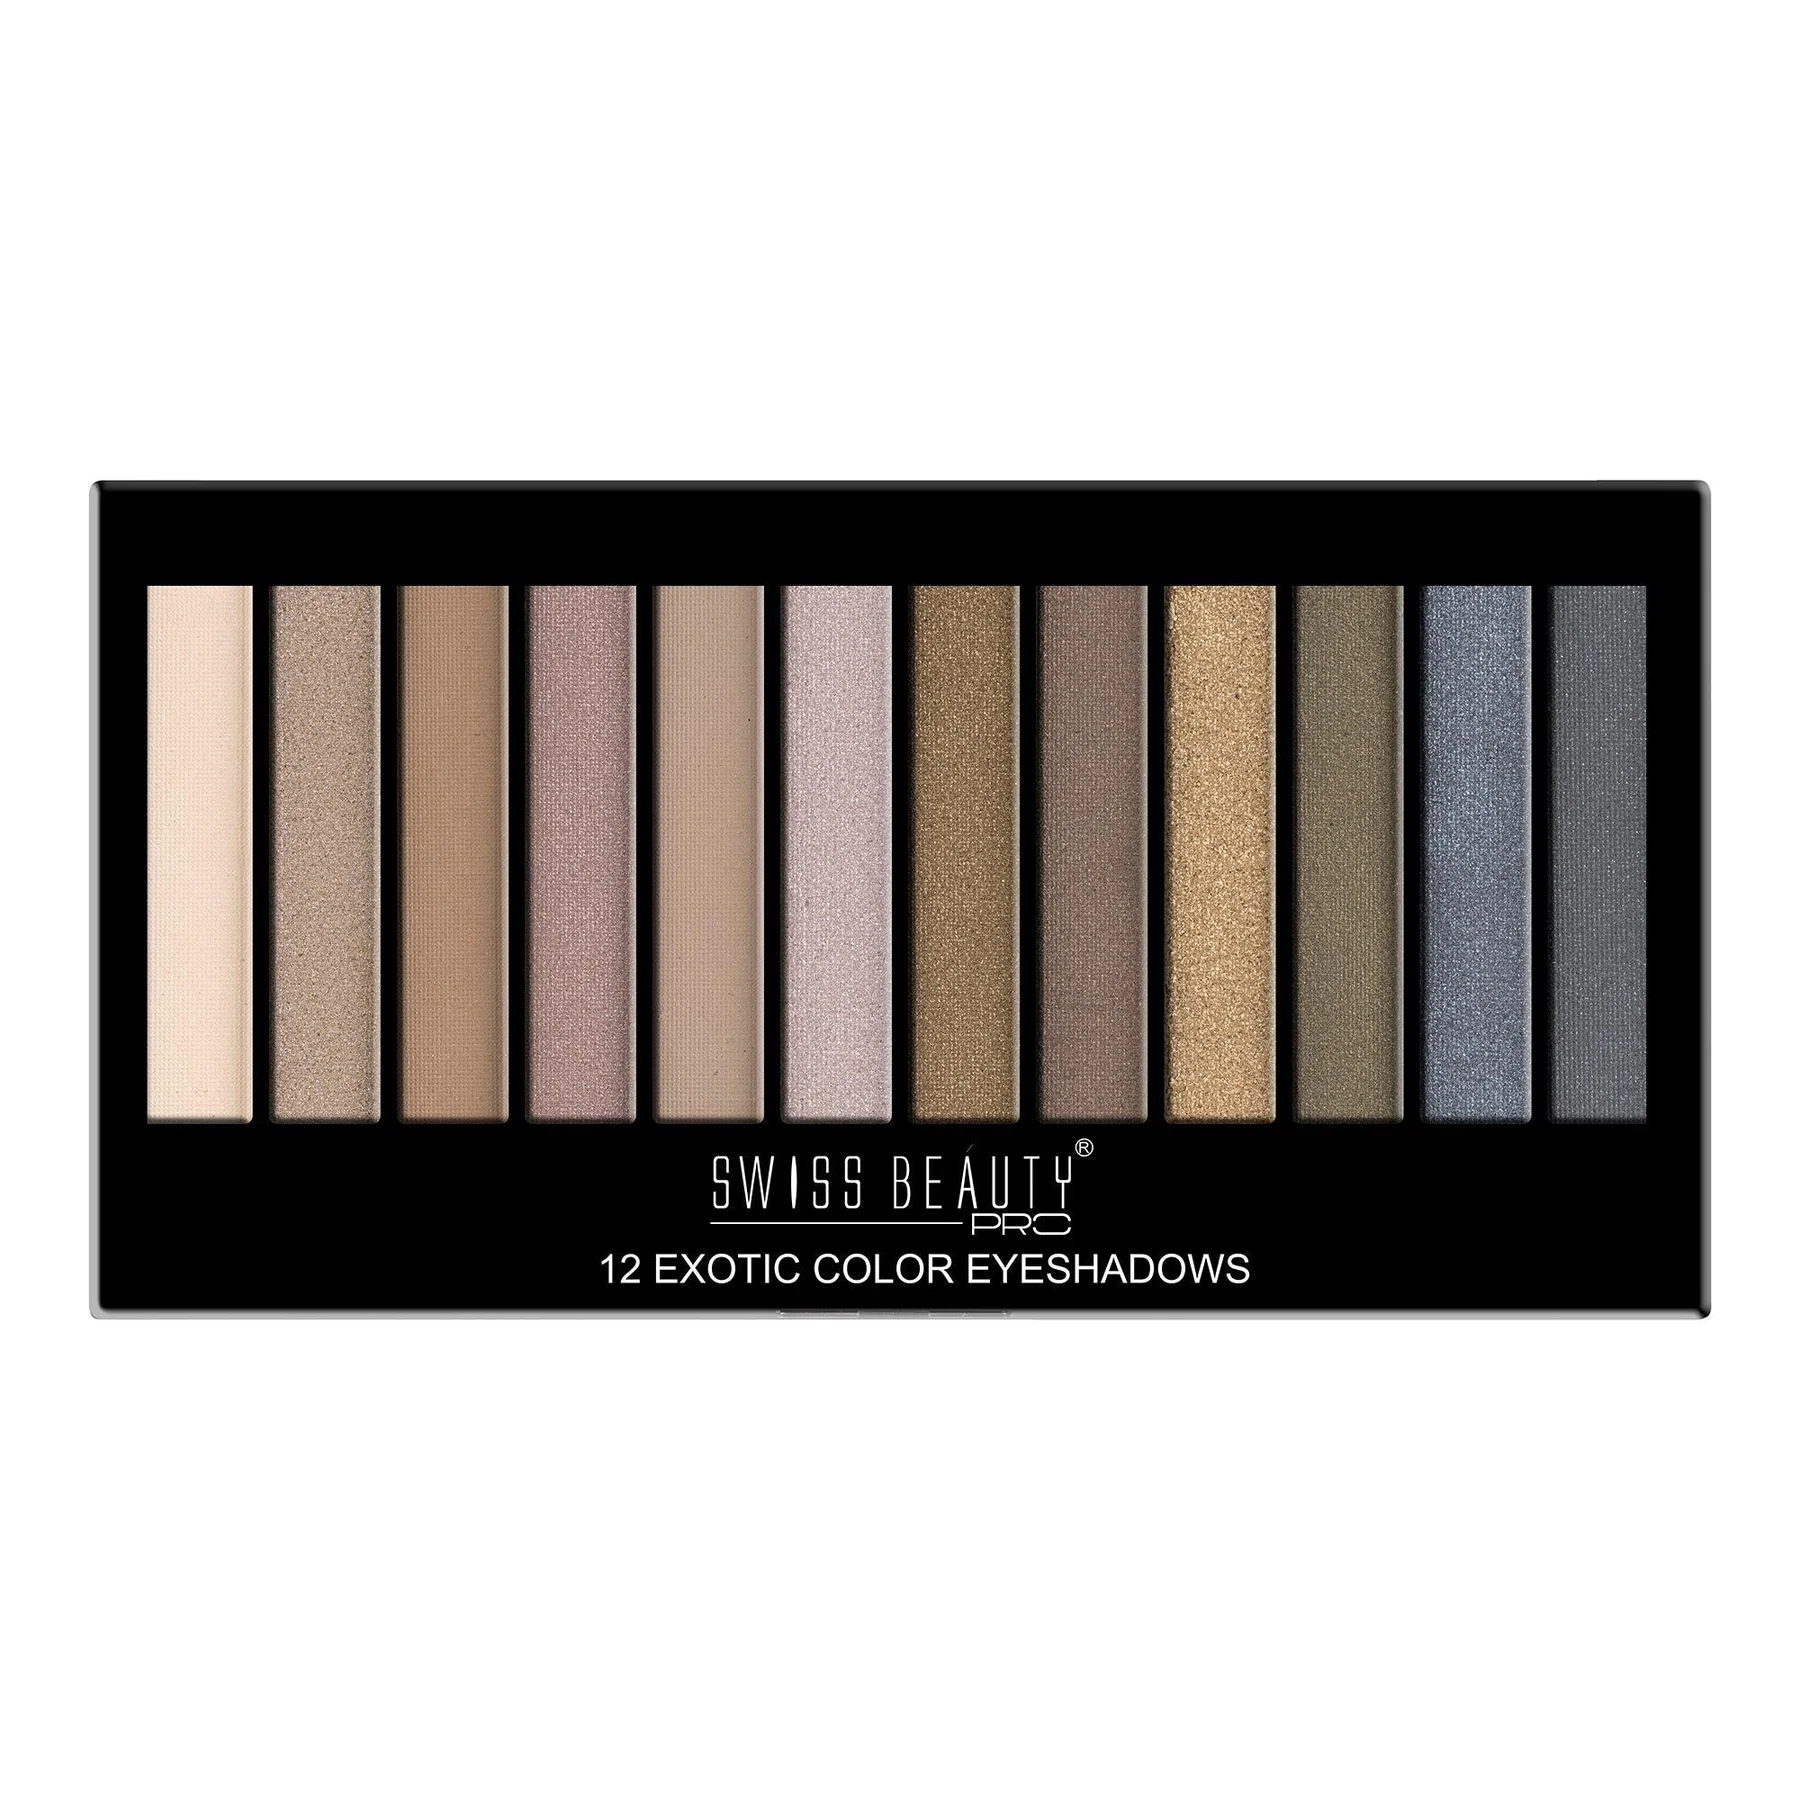 Swiss beauty pro 12 exotic color eyeshadows